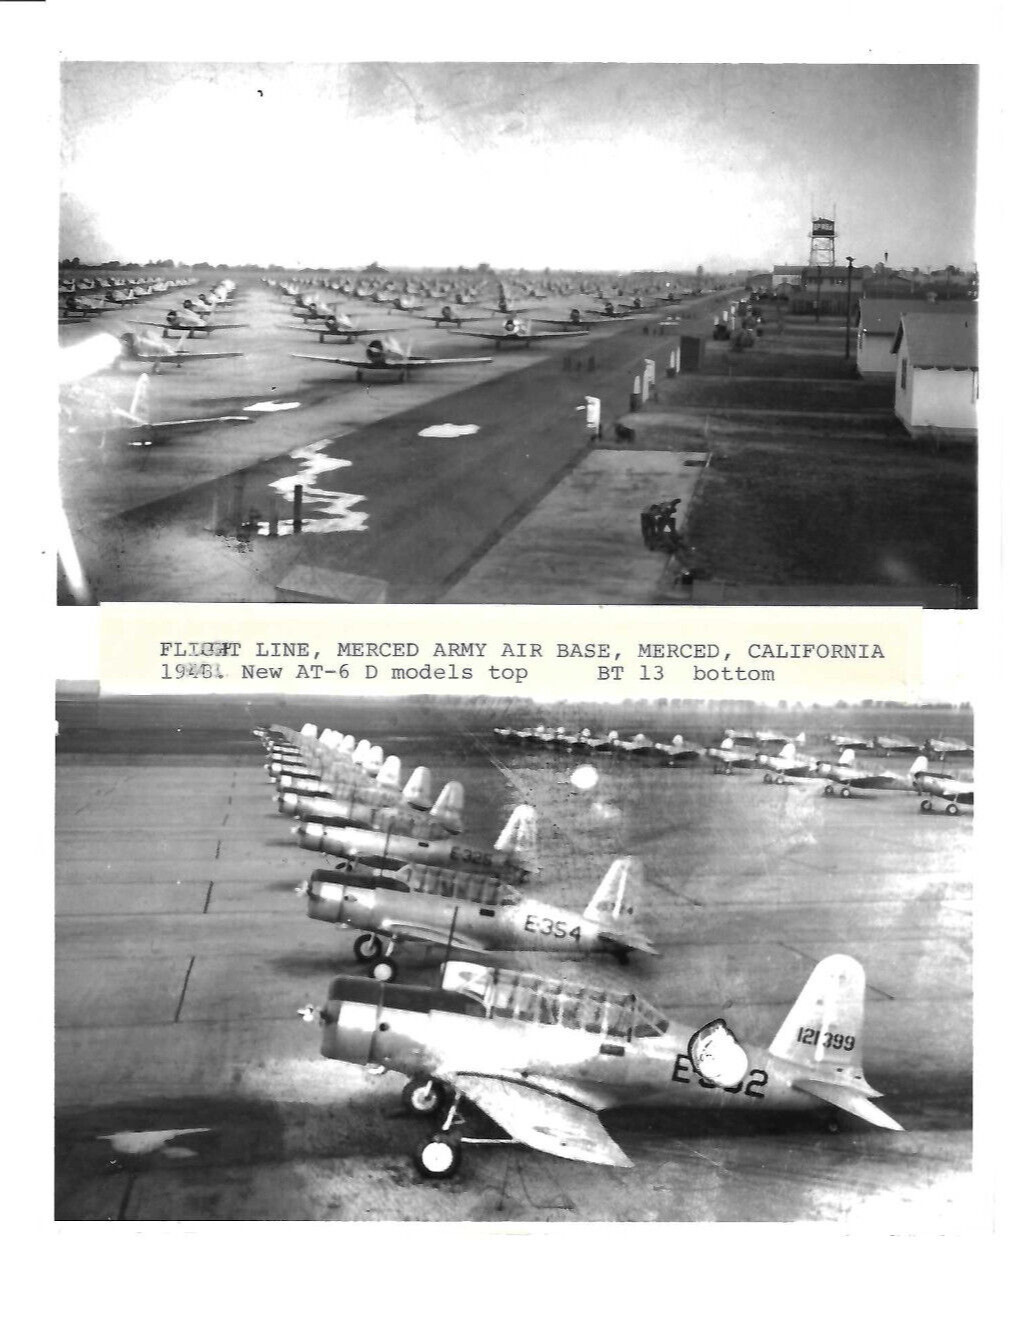 2 VTG 1944 WWII AAF PHOTOS AT-6 D&BT-13 TRAINER AIRPLANES/MERCED ARMY AIR FIELD